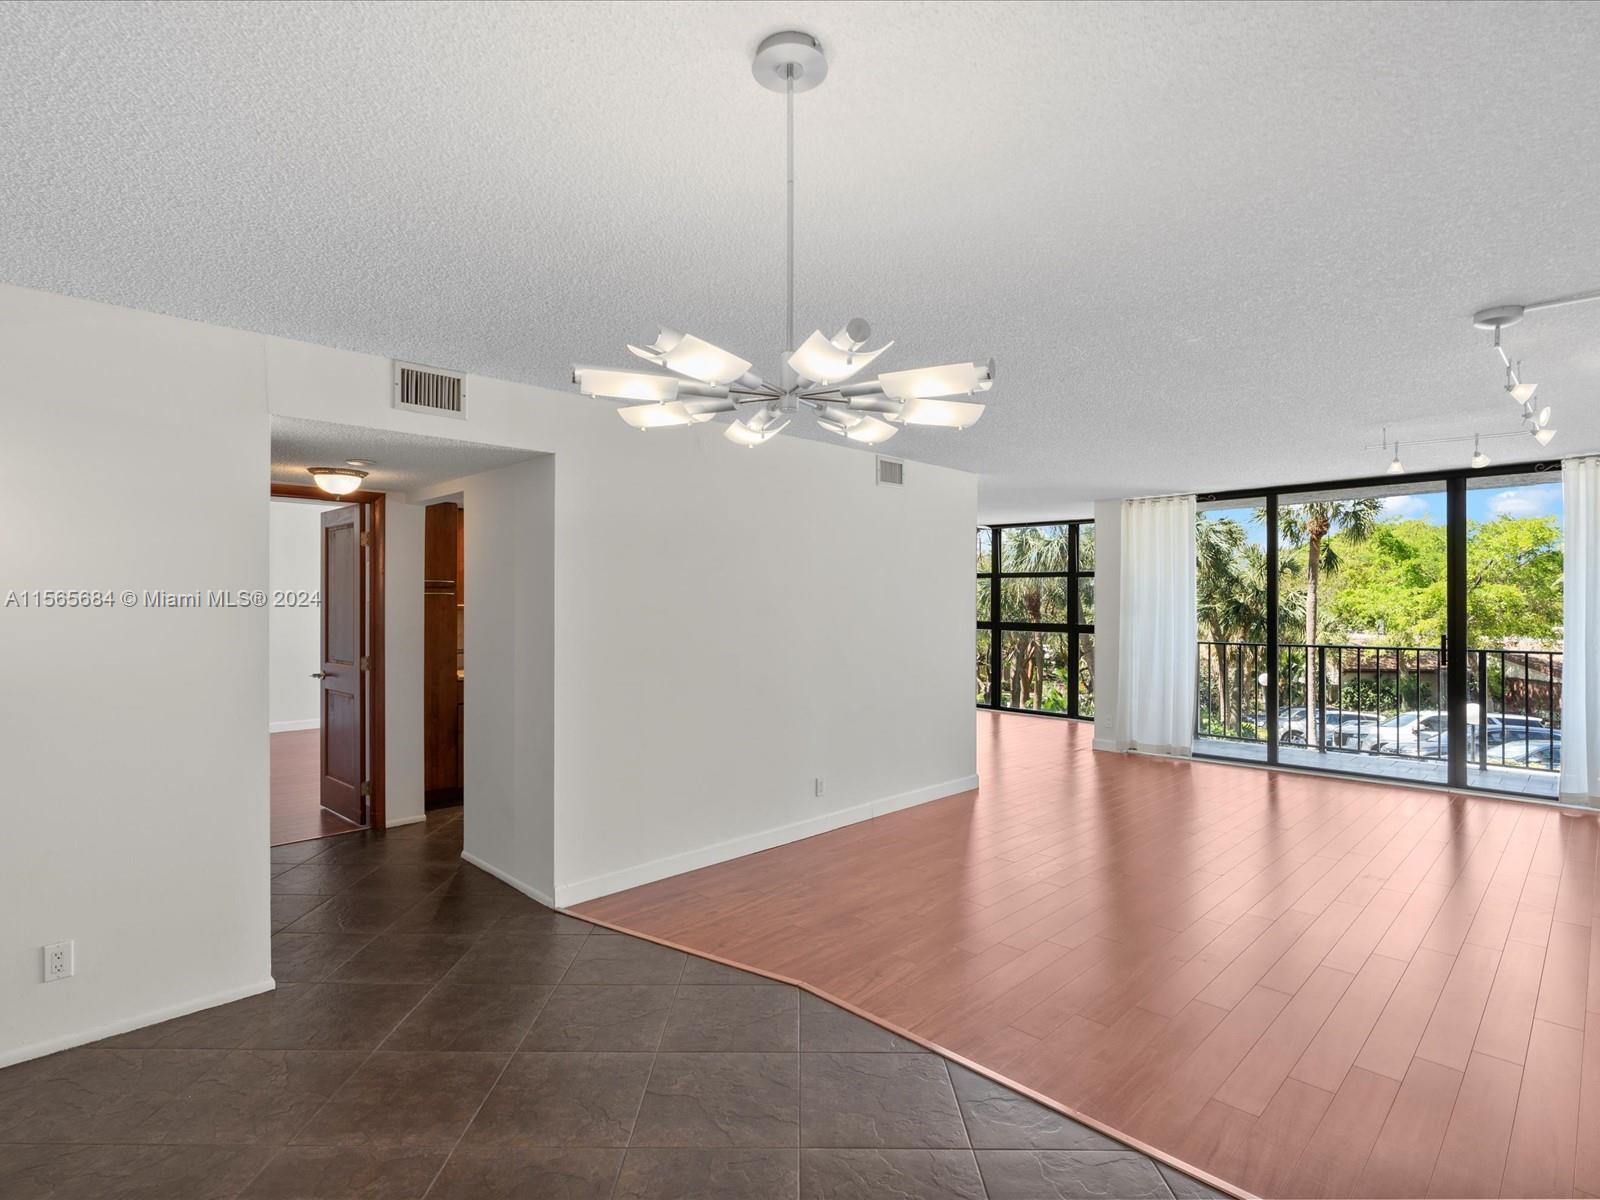 Welcome to 200 Leslie Dr. in the heart of Hallandale Beach's Three Islands Neighborhood. This beauti